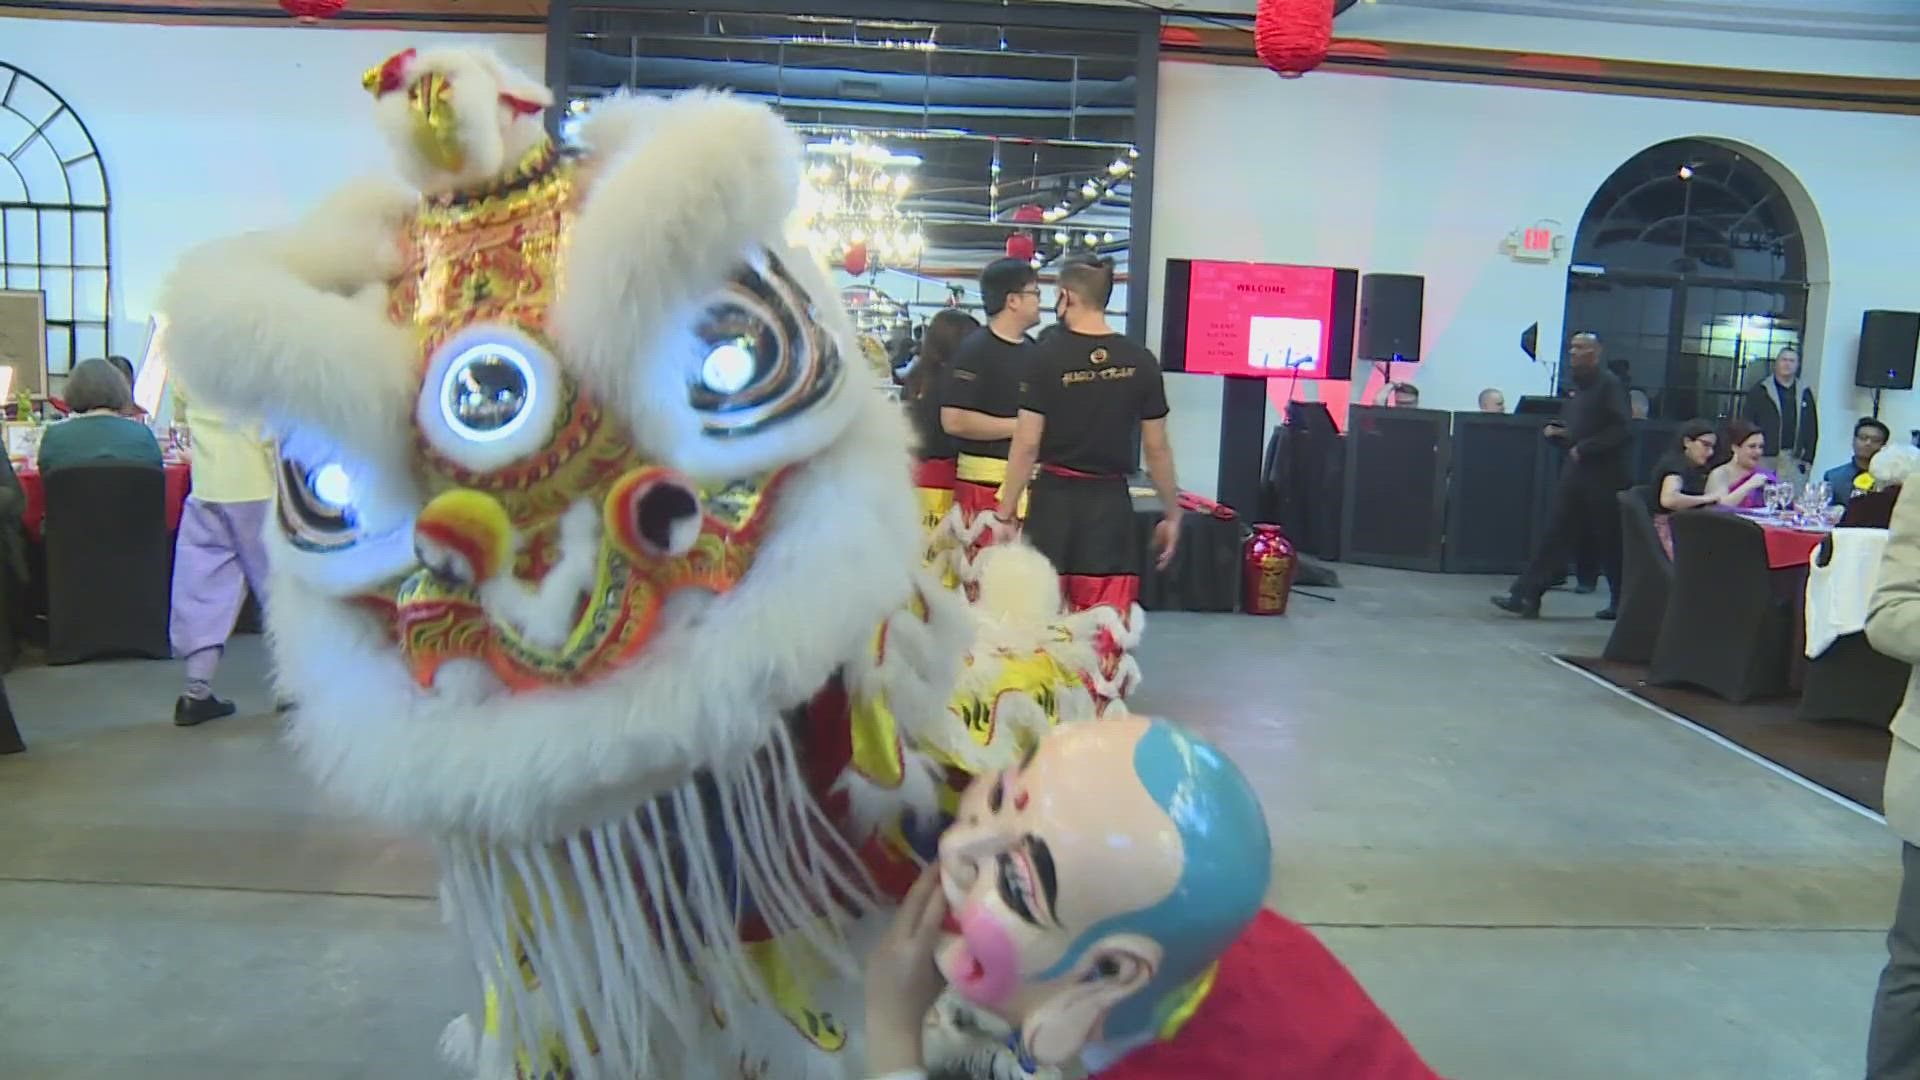 The nonprofit has celebrated the Lunar New Year for more than 20 years.